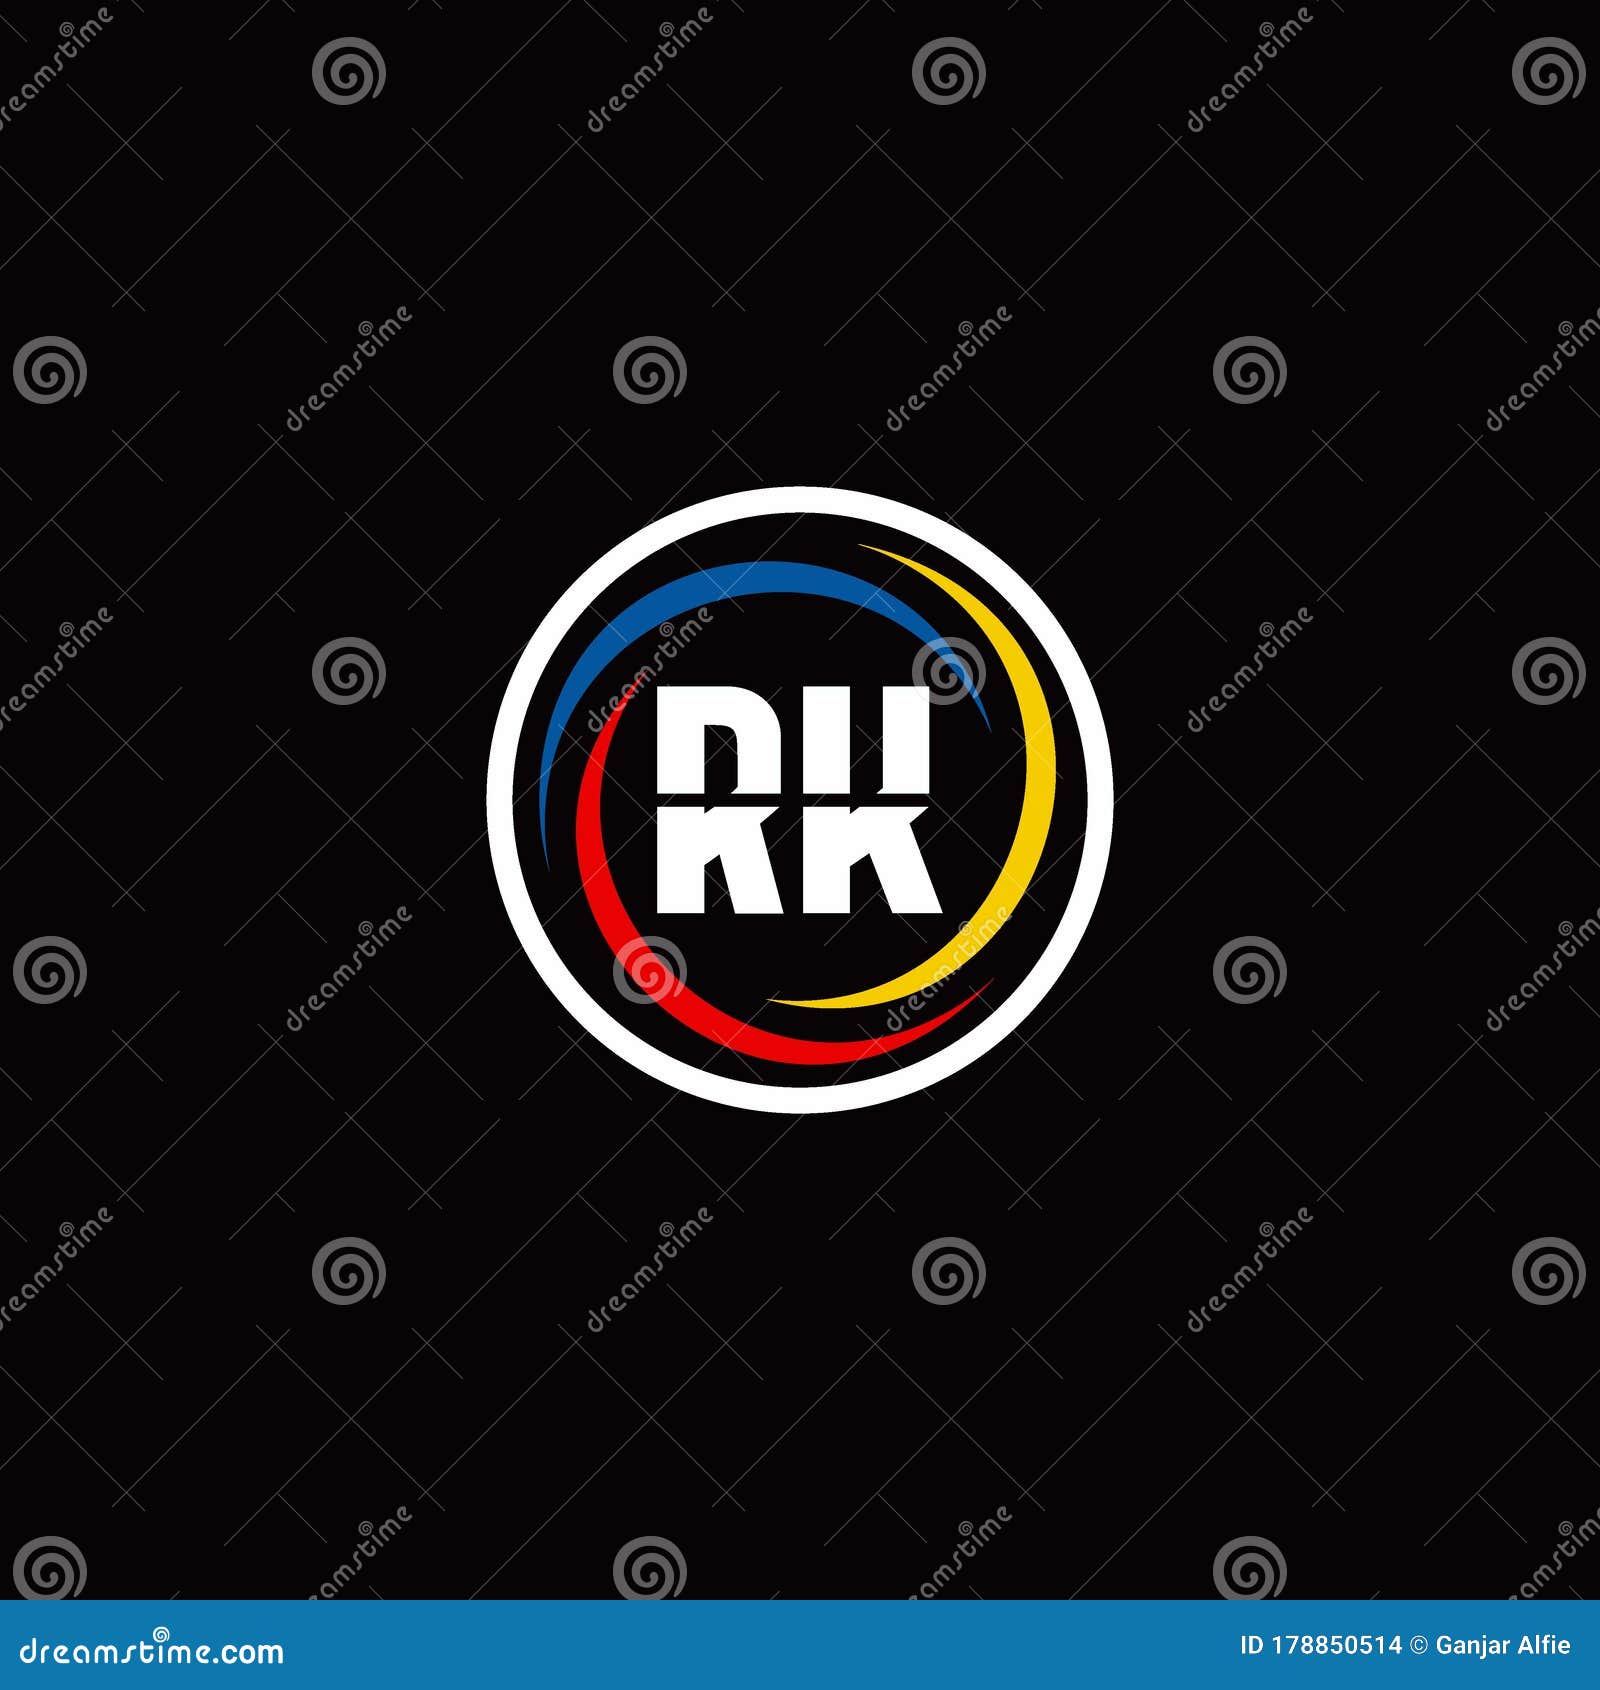 Rk letter logo design with camera icon Royalty Free Vector